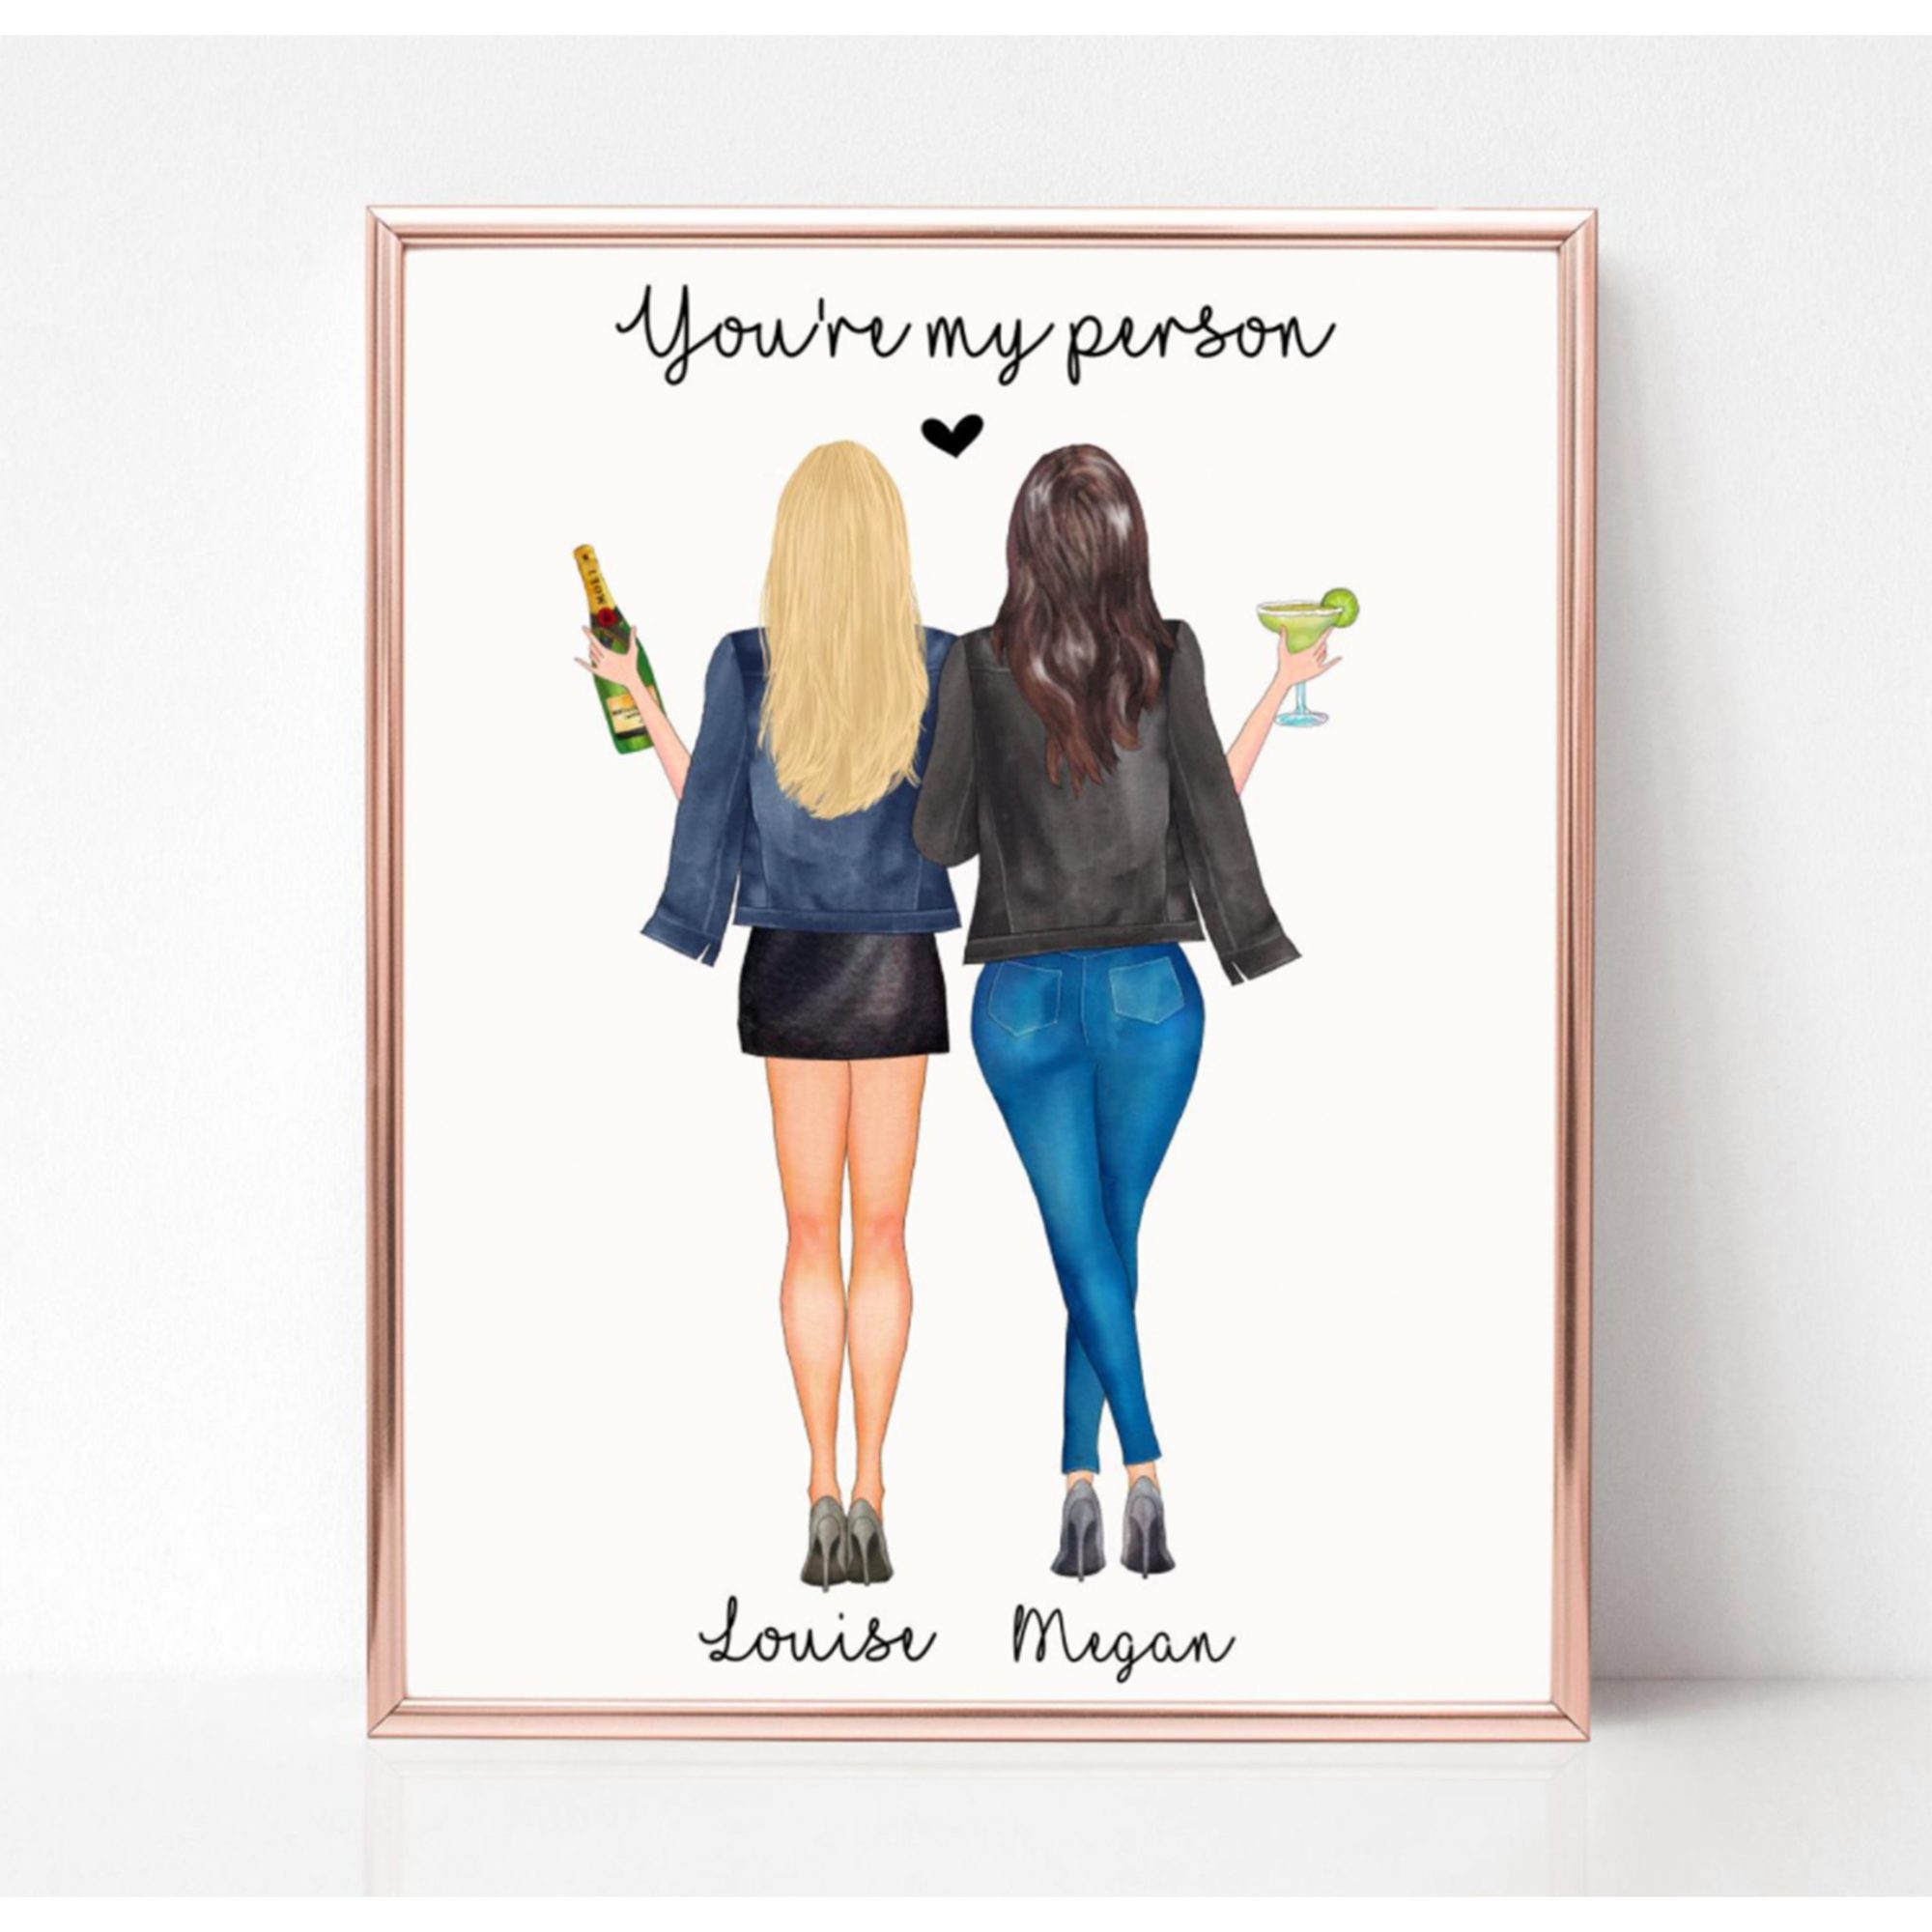 The 61 Best Gifts for Best Friends - PureWow